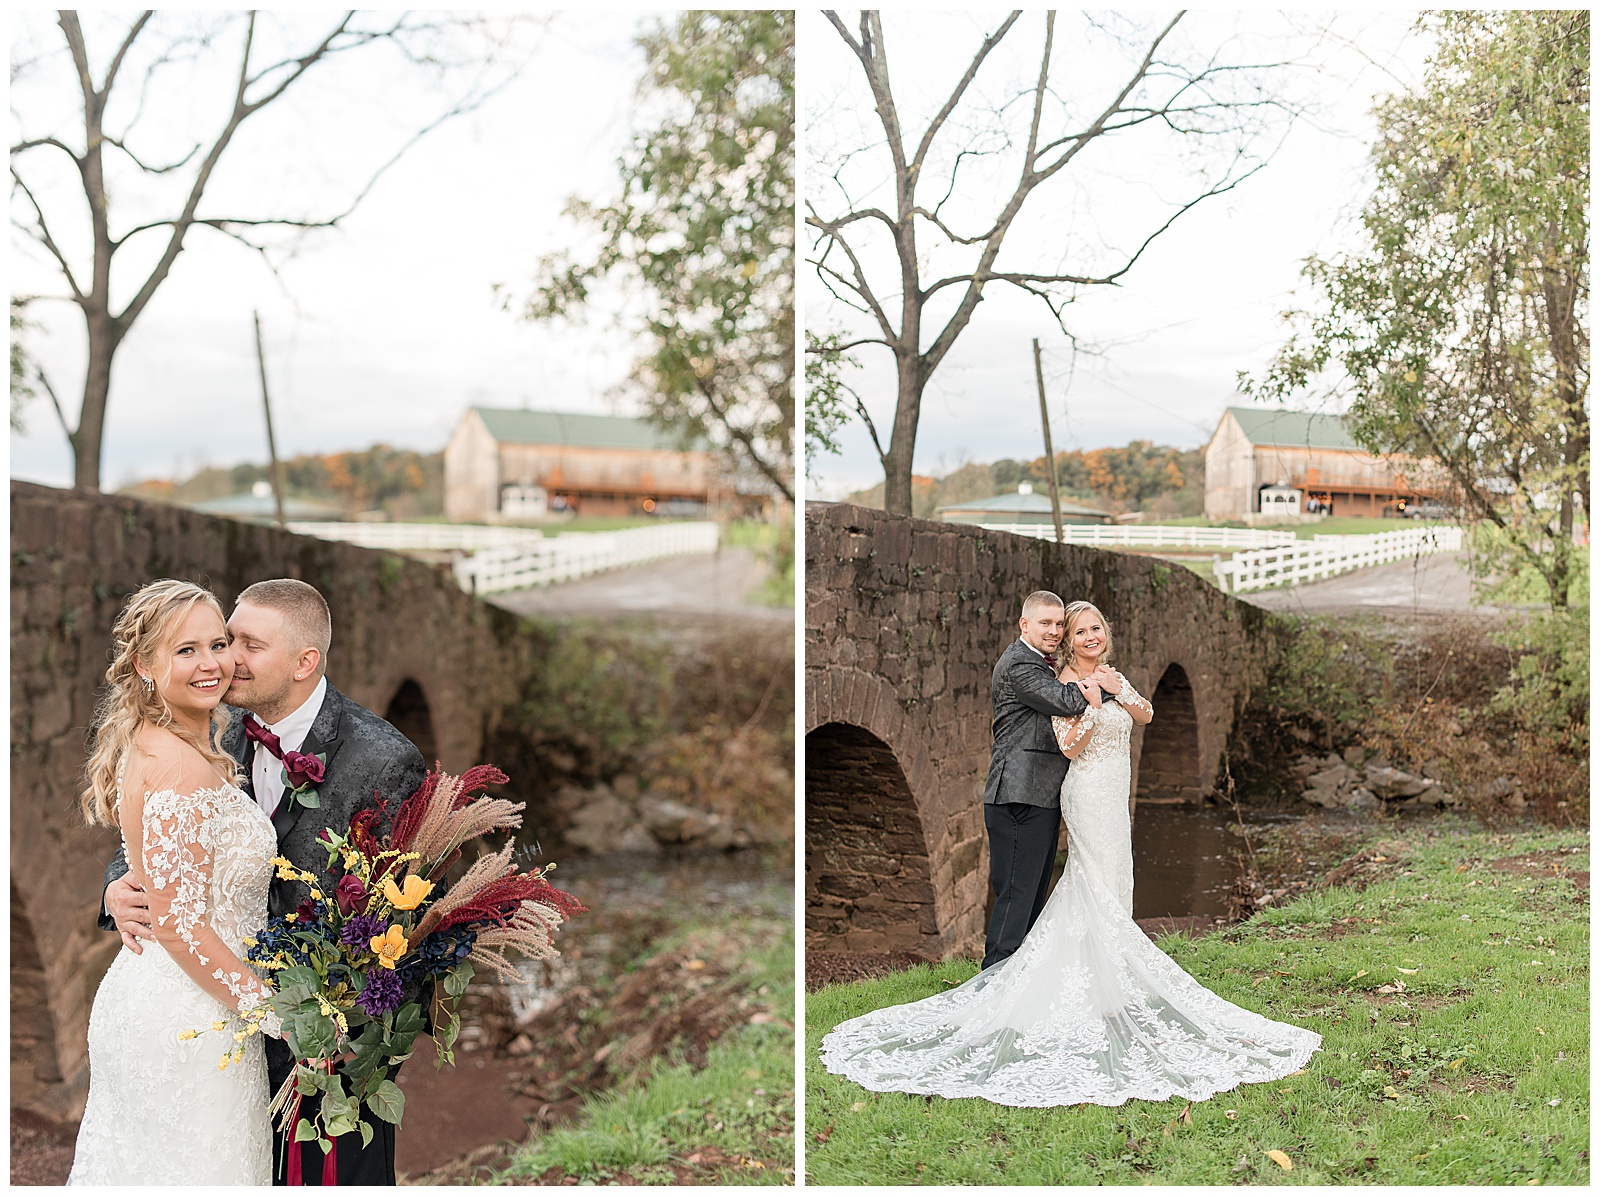 groom hugging his bride with her dress displayed on grass by old bridge on cloudy fall day